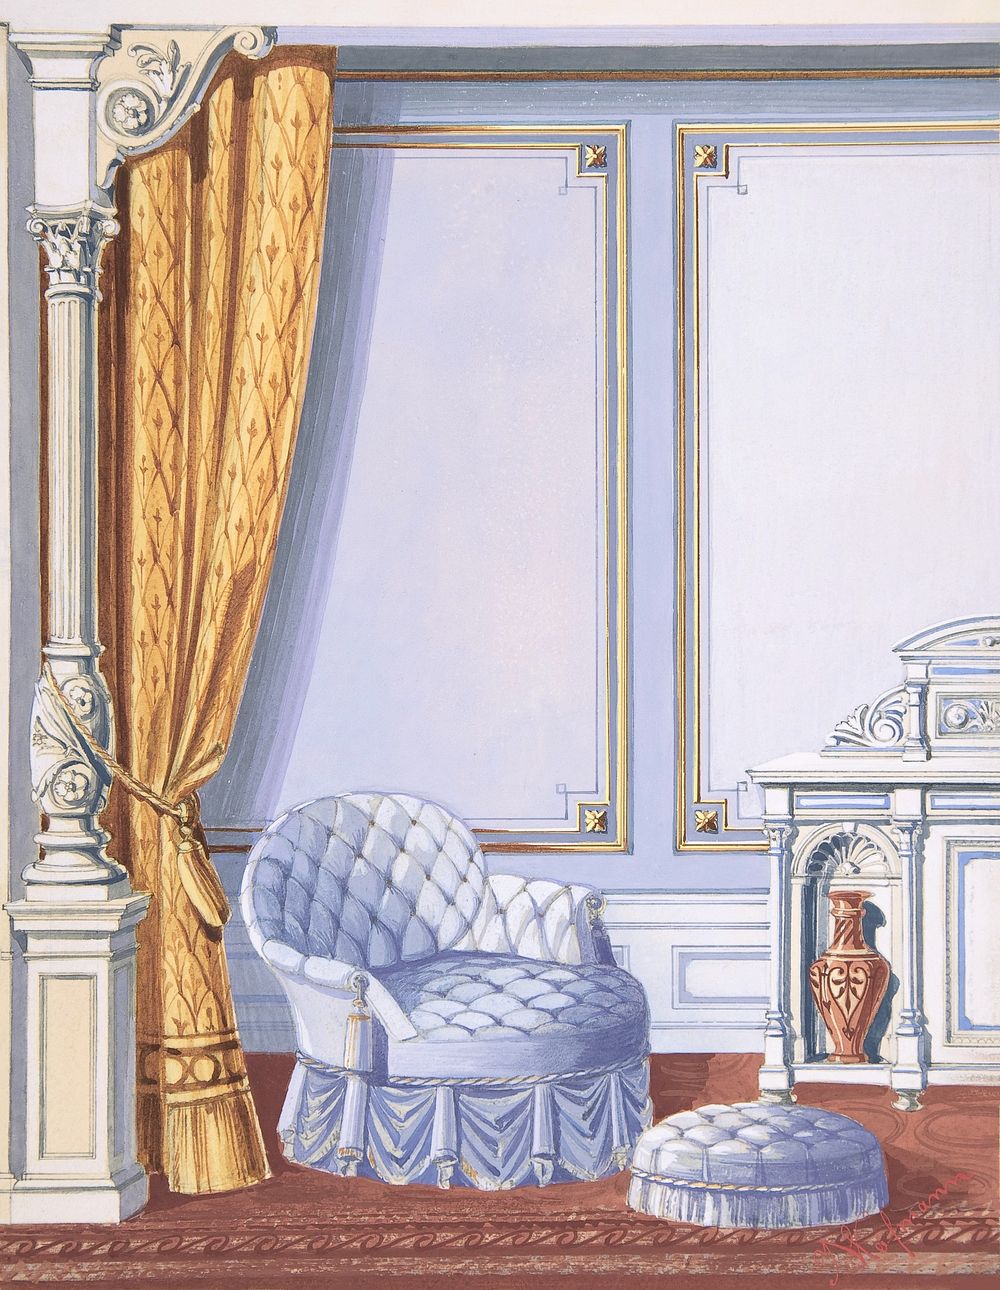 Room Interior Design for a Gray Curtained Alcove, with an Uphostered Armchair, Ottoman and Cabinet (late 19th century).…